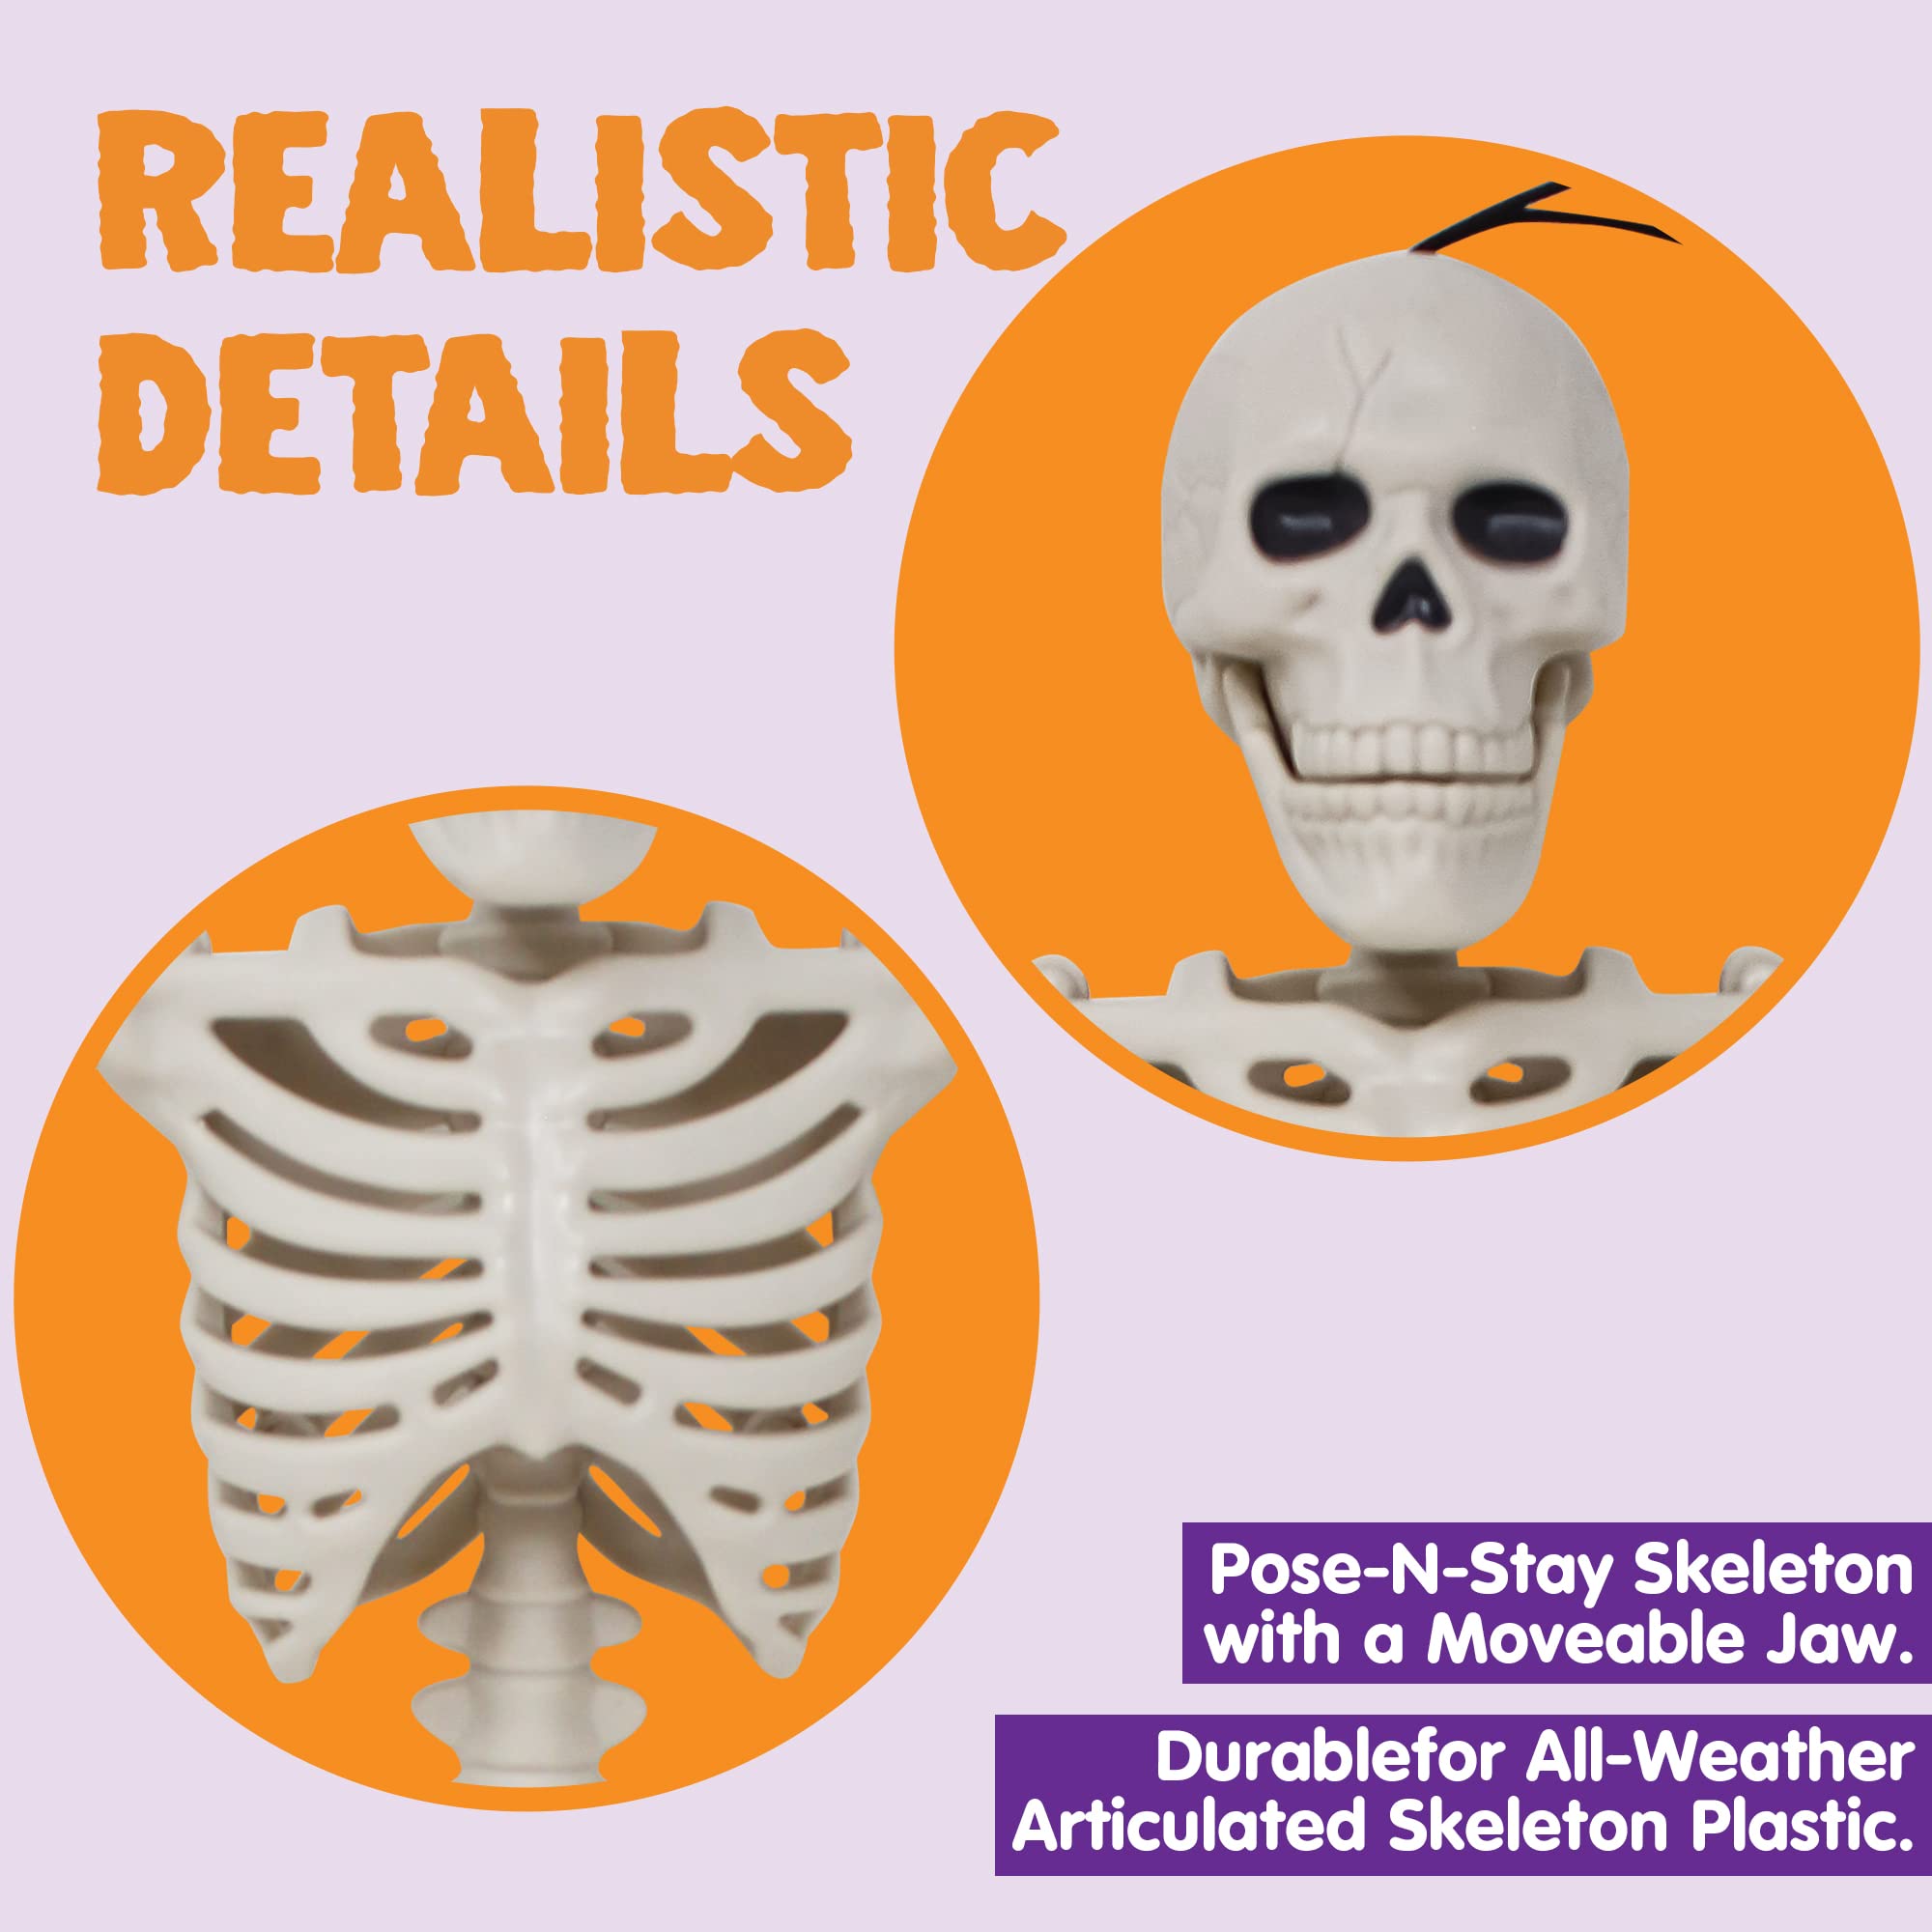 JOYIN 10 Halloween Hanging Skeletons 16” Full Body Stretchy Realistic Human Plastic Bones with Movable Posable Joints for Halloween Indoor Outdoor Party Decor, Graveyard Decorations, Haunted House Photo Prop Accessories